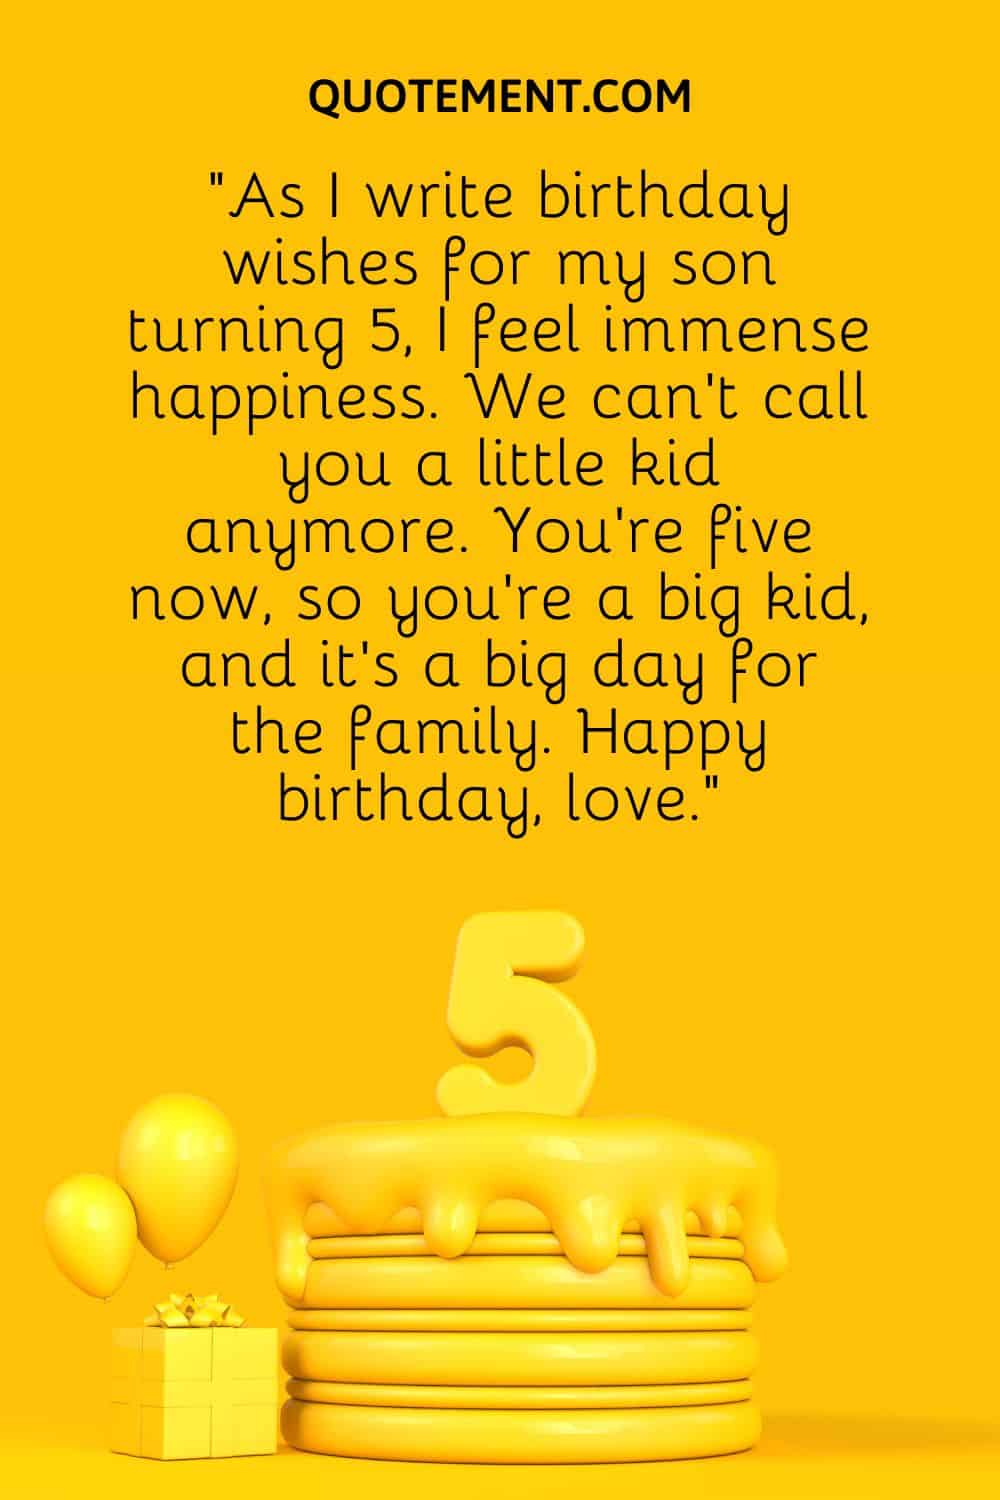 “As I write birthday wishes for my son turning 5, I feel immense happiness. We can’t call you a little kid anymore.